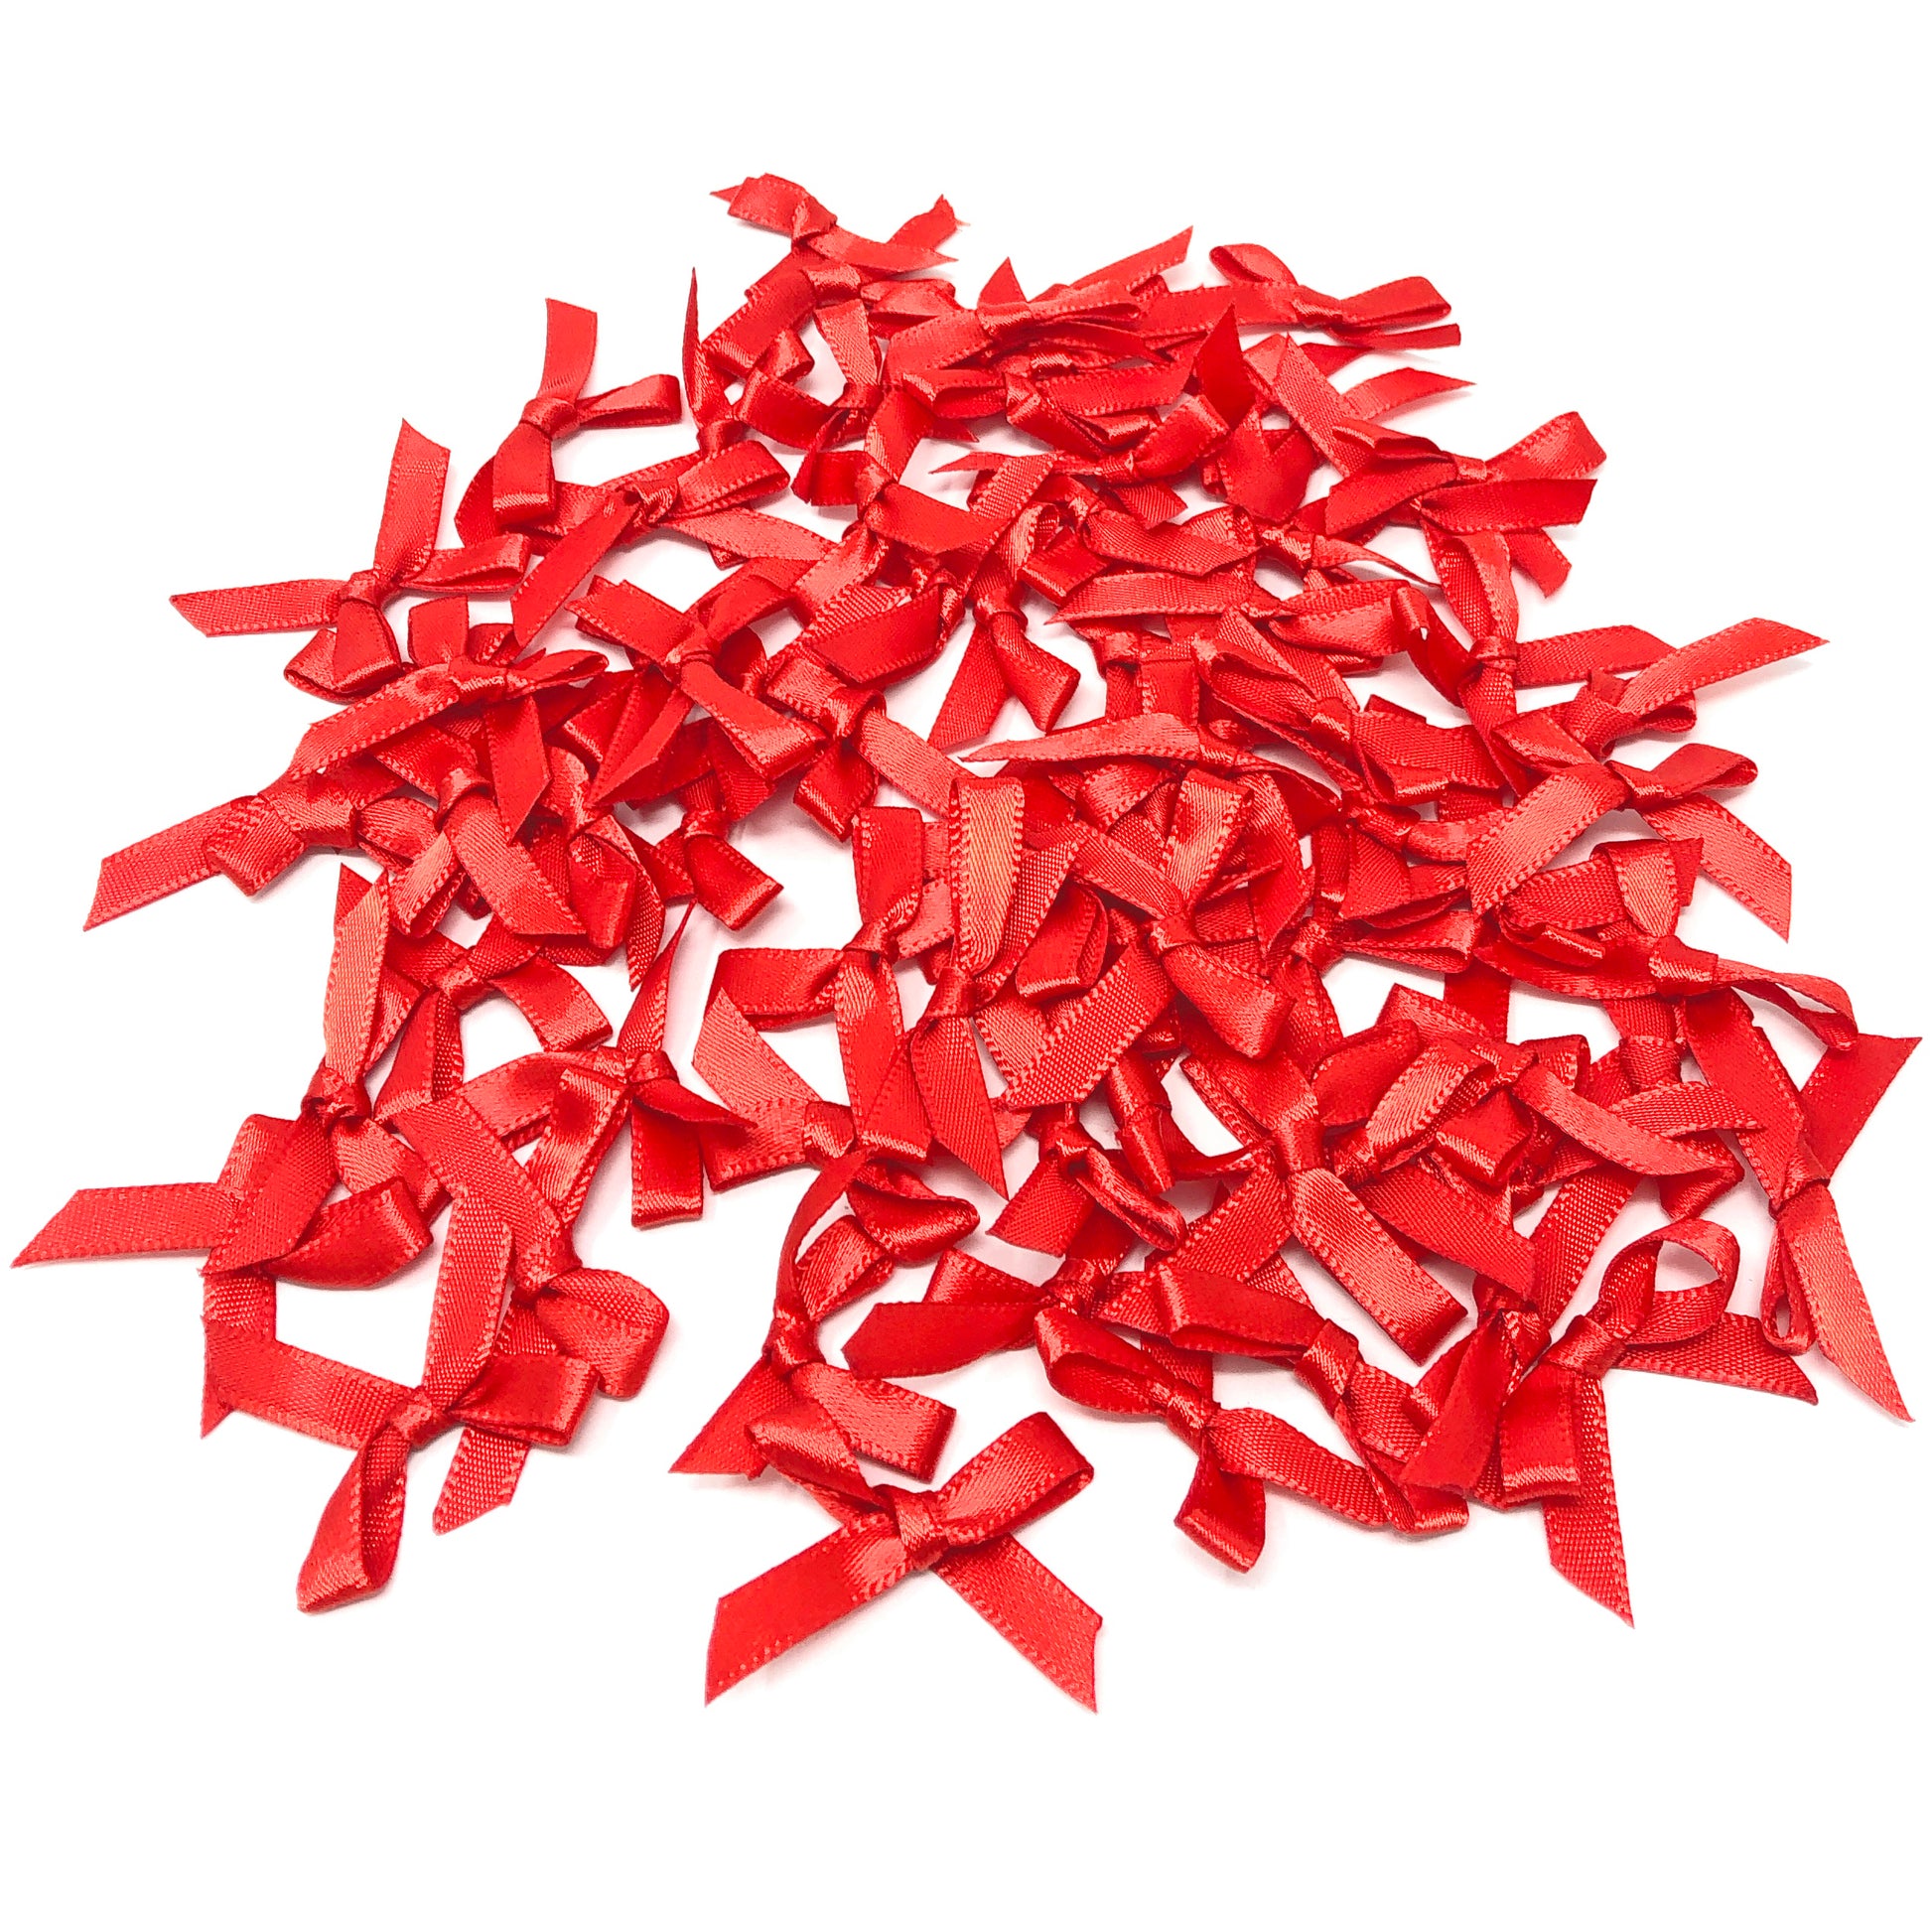 Red 7mm 40x25mm Christmas Ribbon Bows - Pack of 75